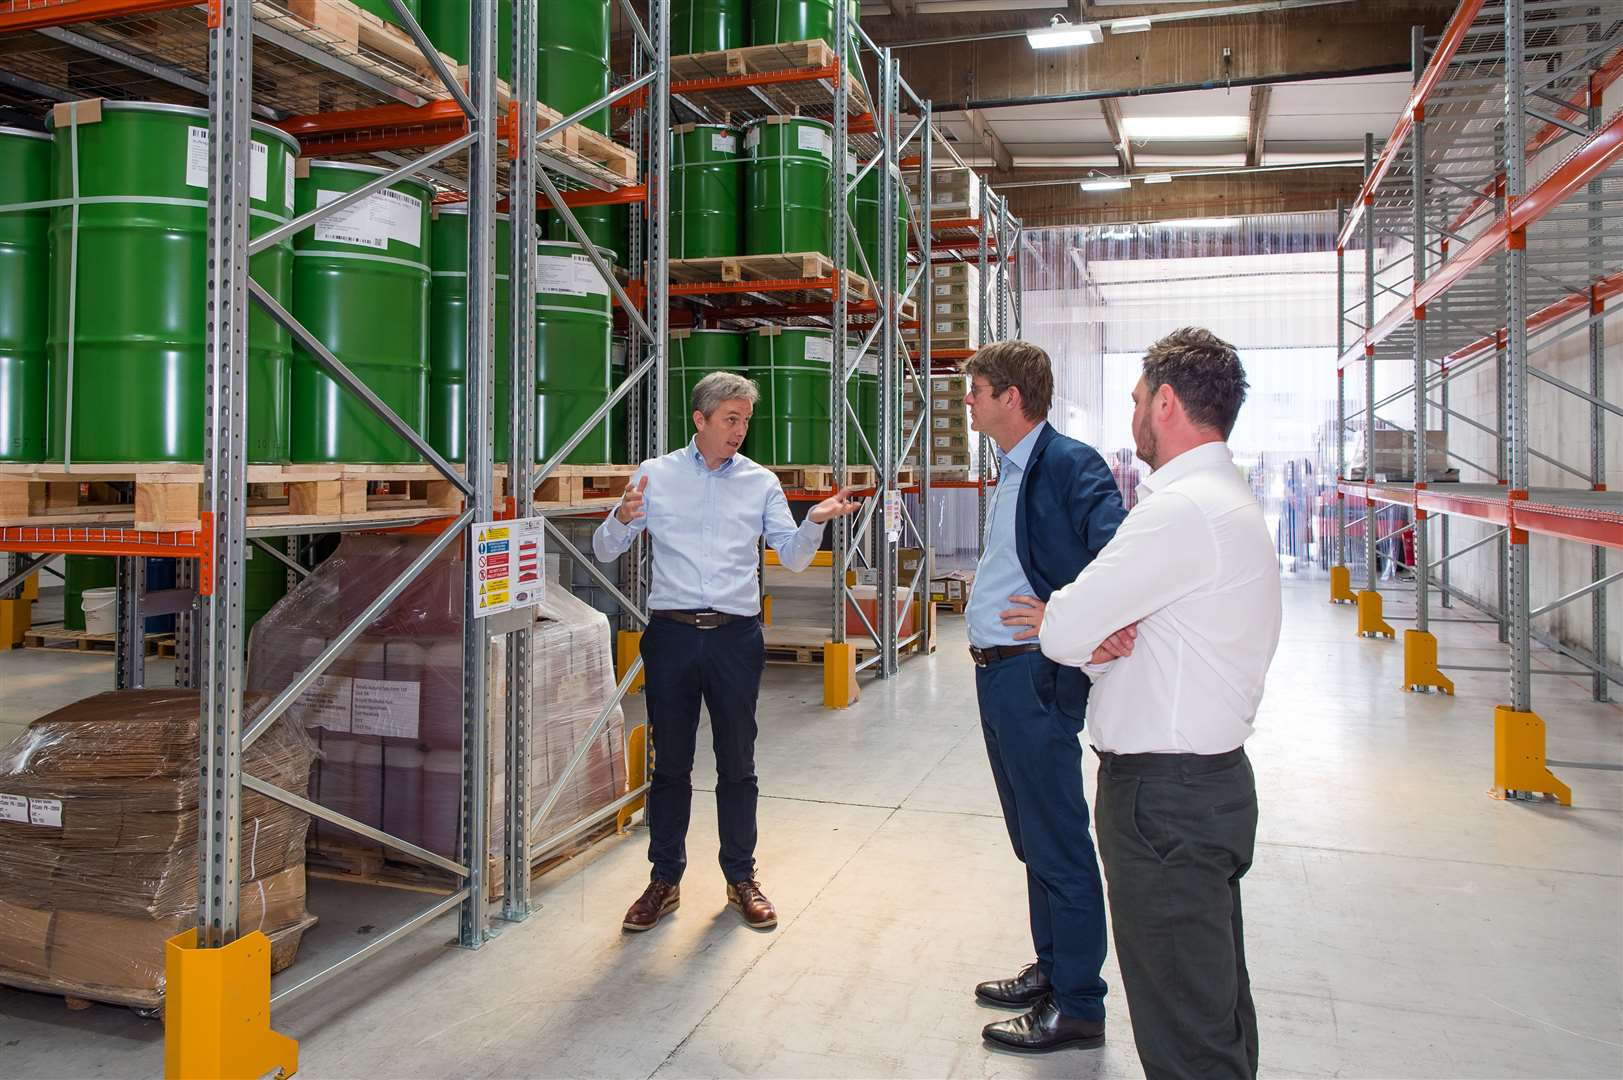 Greg Clark takes a tour of the plant with Colin Wilson and Nathan Biginton